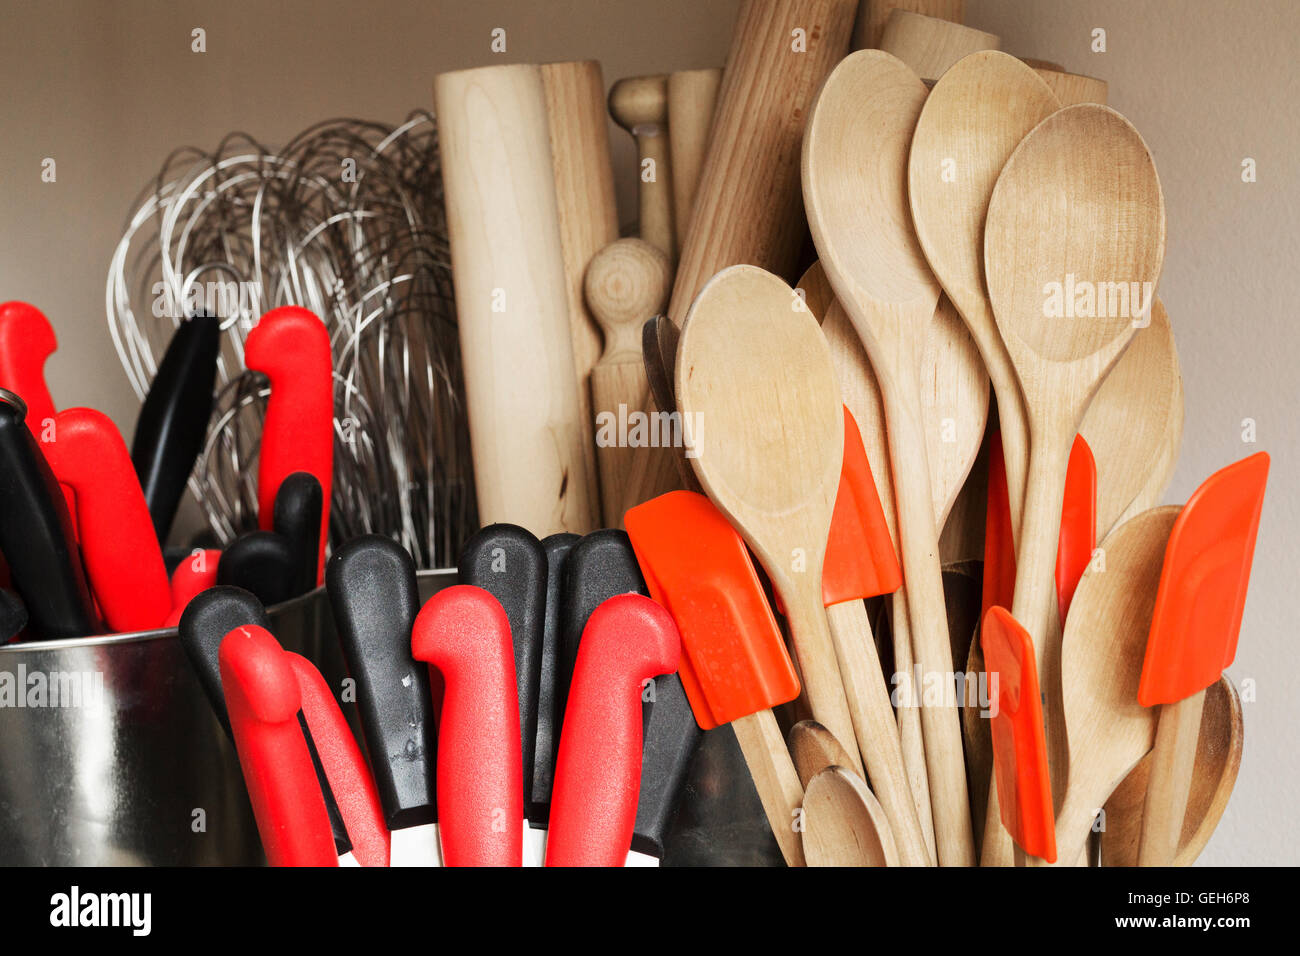 Selection of cooking utensils, wooden spoons, spatulas, rolling pins, whisks and kitchen knives. Stock Photo